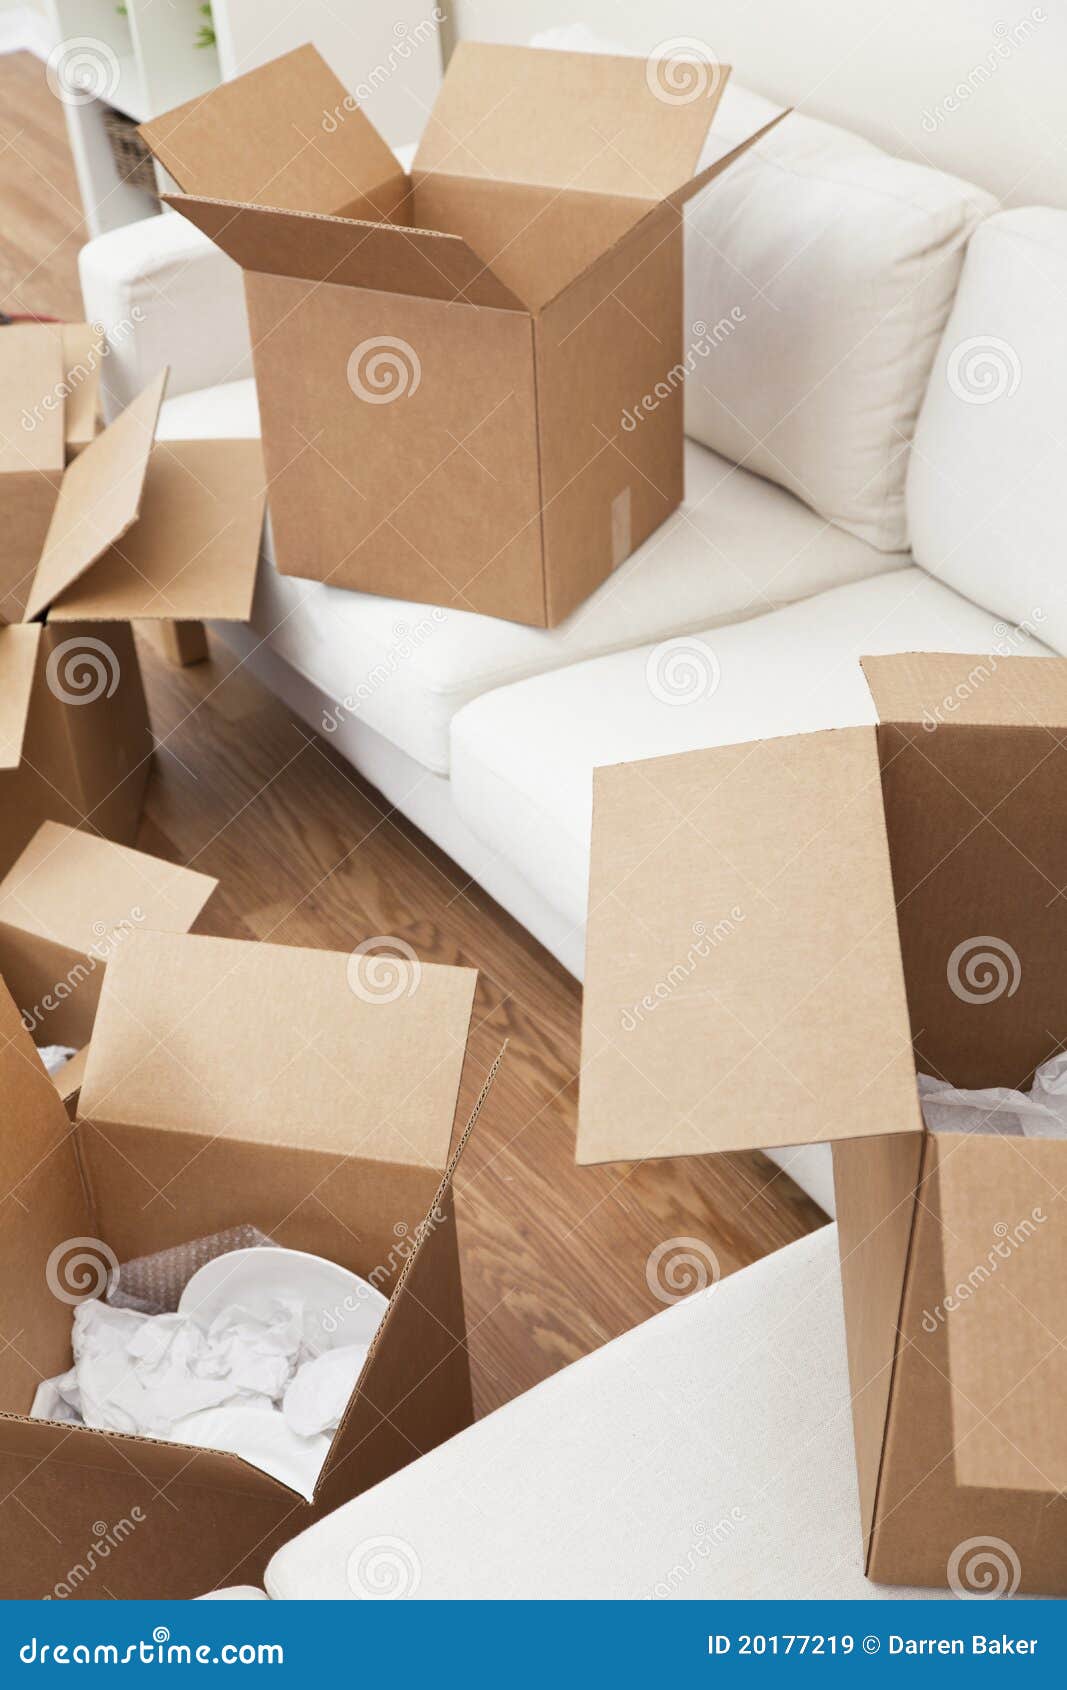 Room of Cardboard Boxes for Moving House Stock Image - Image of agent